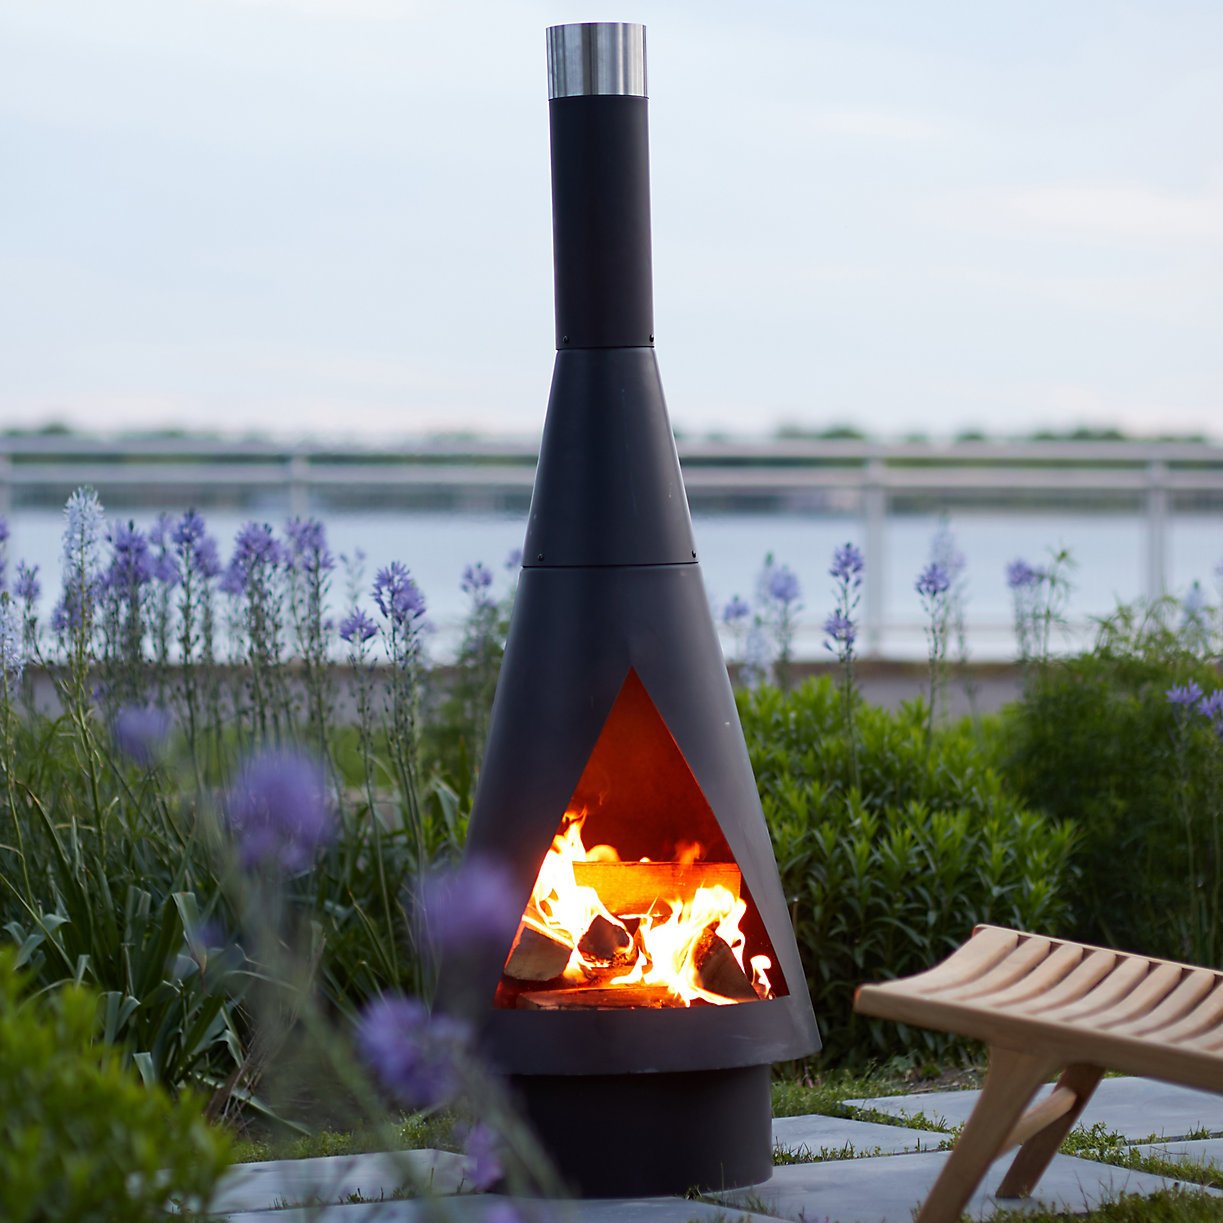 Terrain Angled Obelisk Chiminea - Go up with this elevated, geometric chiminea. Welded from a single piece of weathering steel, this timeless wood-burning outdoor fireplace will develop a beautiful patina over time. SHOP NOW >” loading=”lazy”></noscript><br/><img decoding=